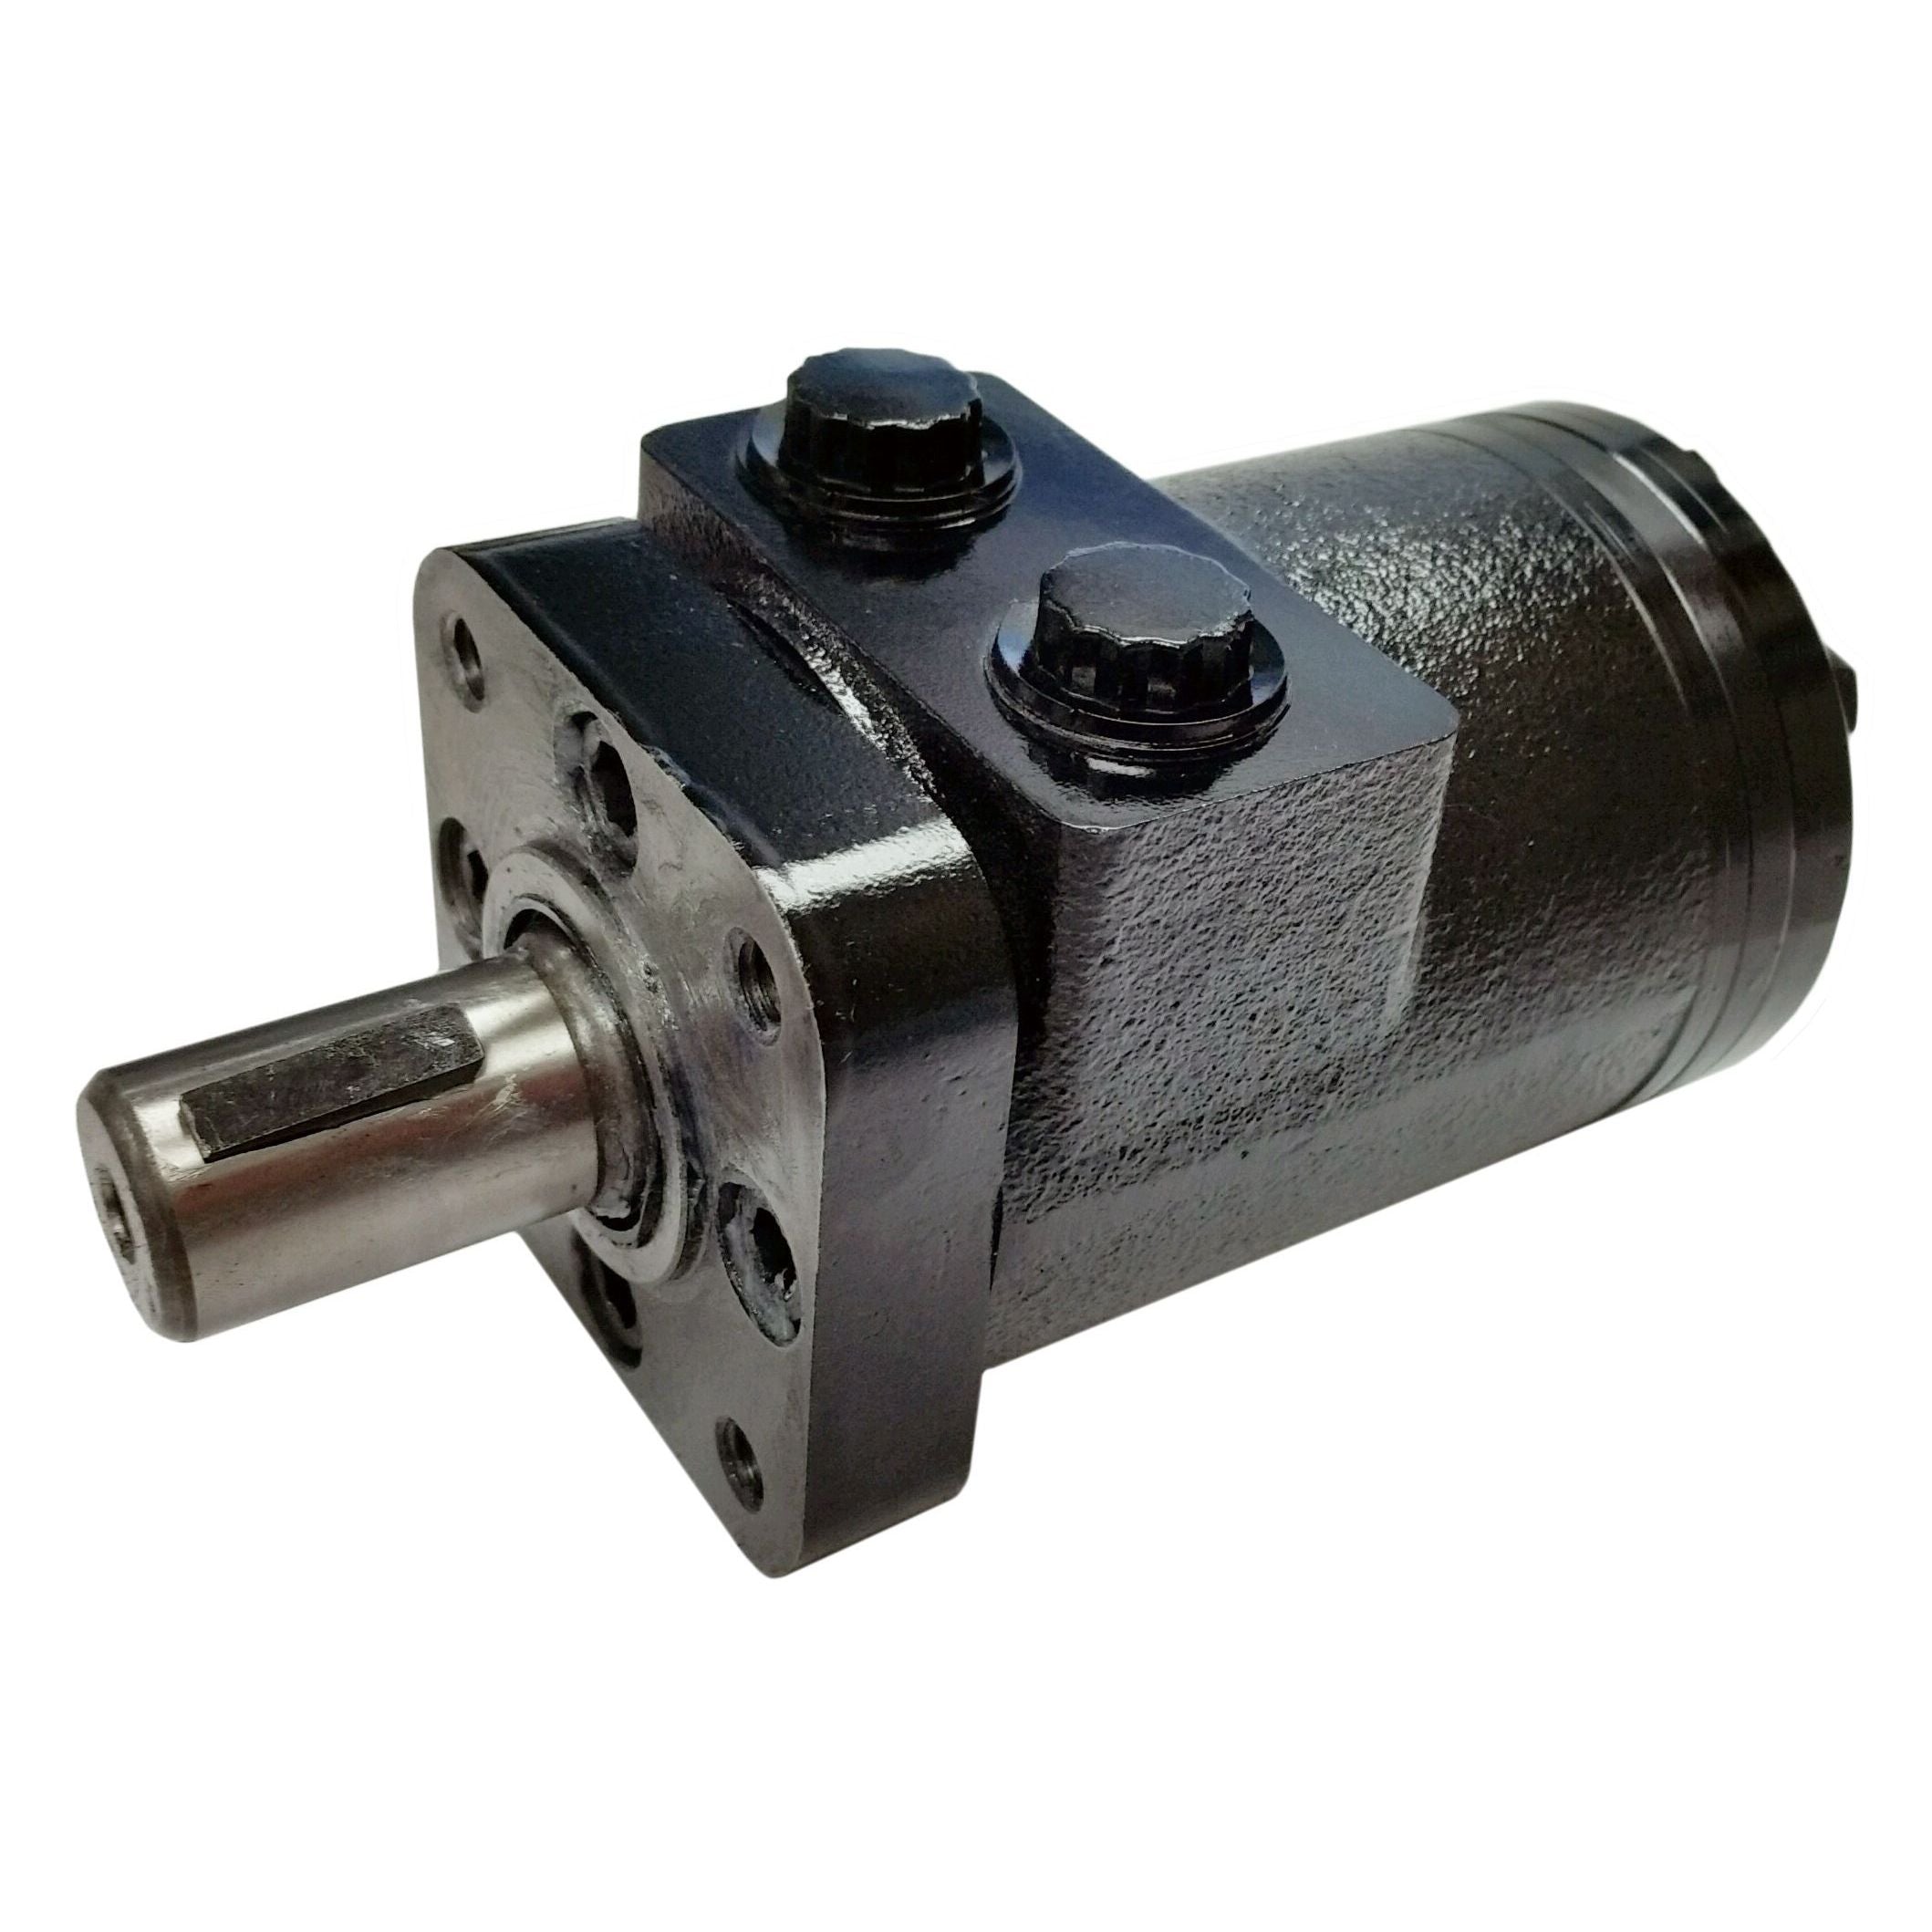 BMPH-50-H4-K-P : Dynamic LSHT Motor, 51.7cc, 1150RPM, 885in-lb, 2031psi Differential, 15.85GPM, SAE A 4-Bolt Mount, 1" Bore x 1/4" Key Shaft, Side Ported, 1/2" NPT